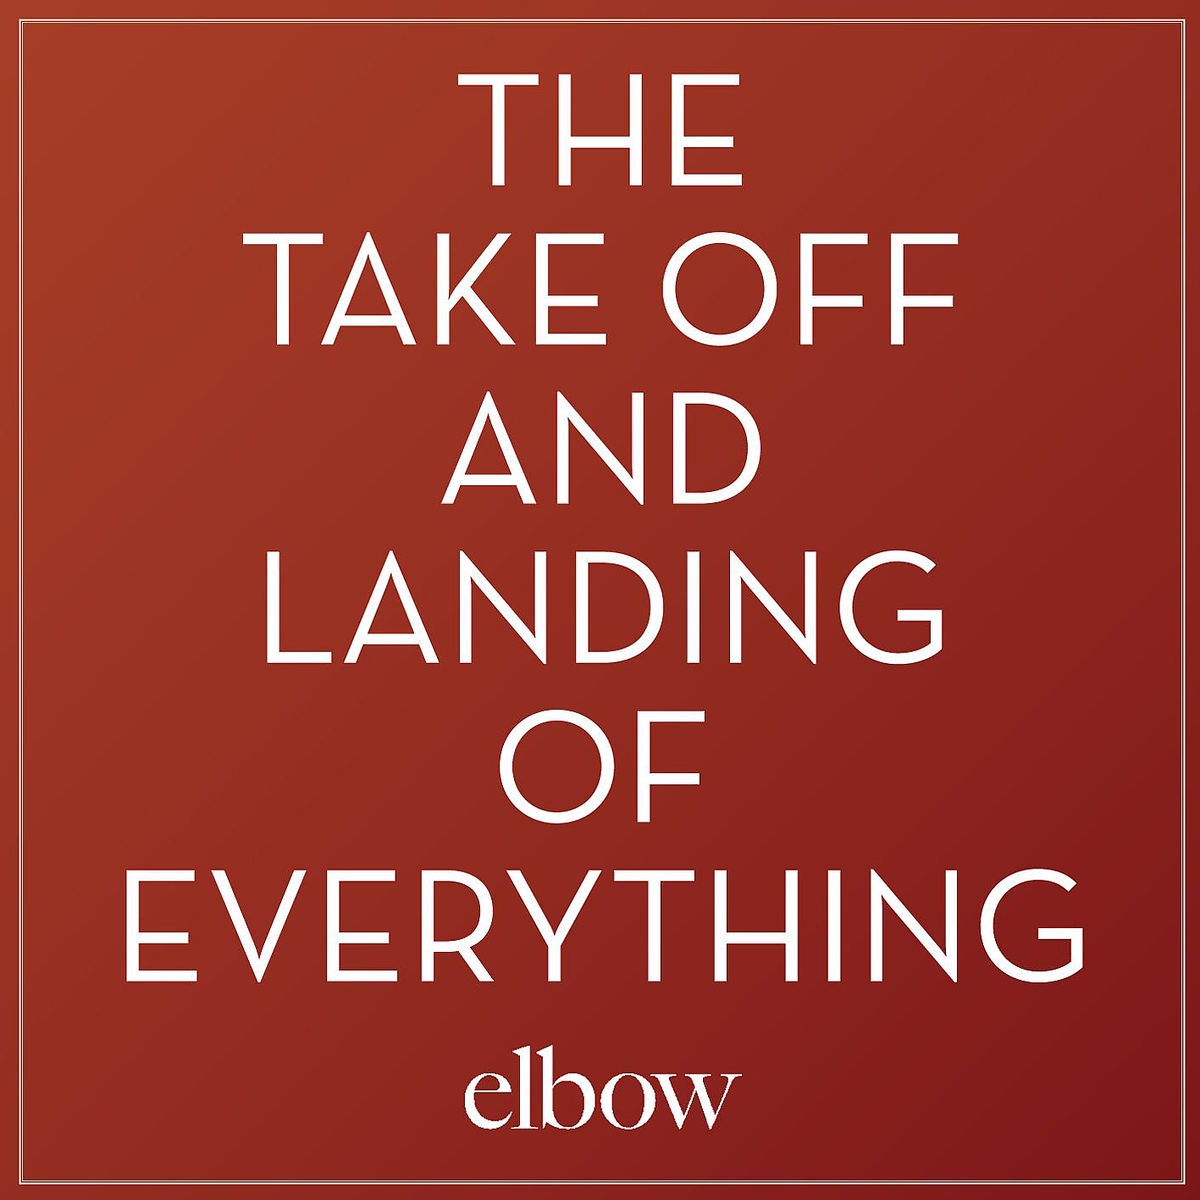 And Everything The Landing Elbow Take - - Of Off (CD)